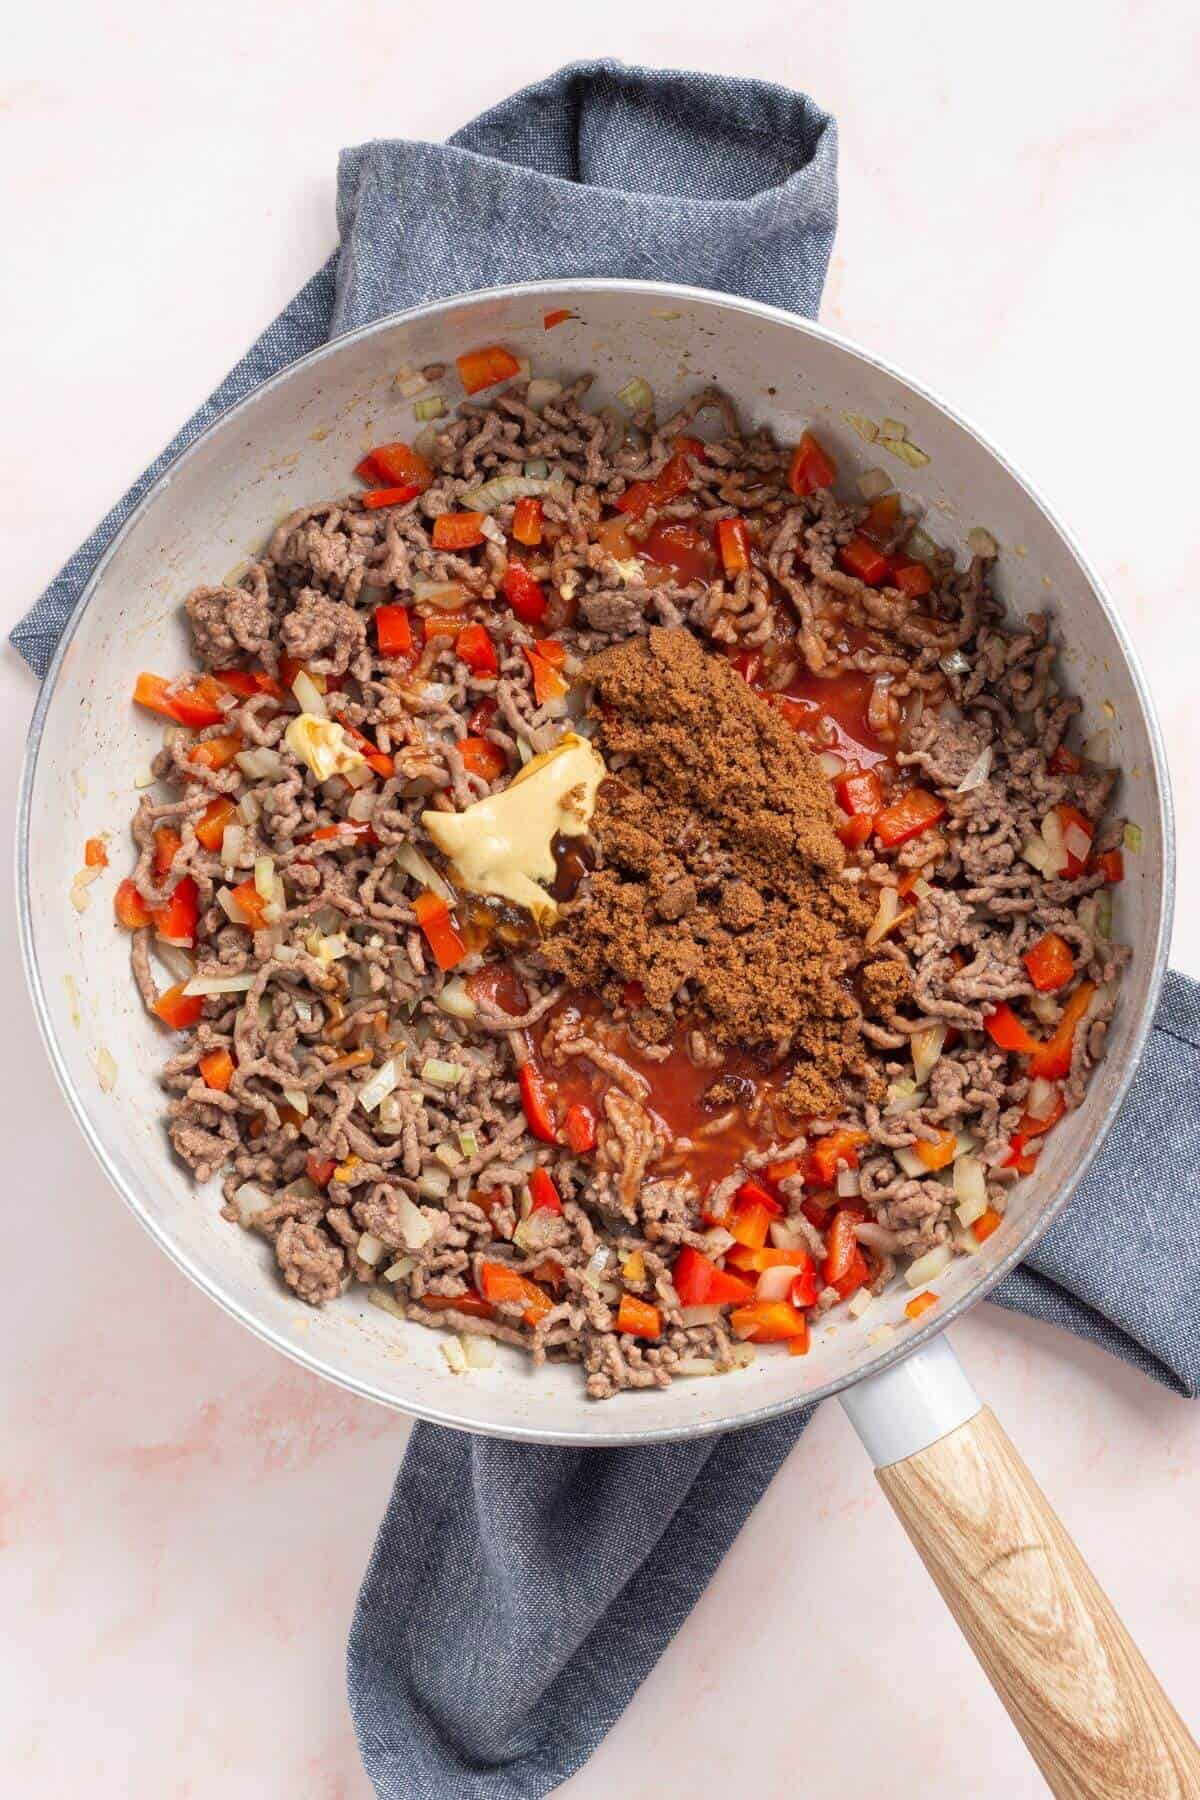 Seasoning added to browned ground beef.